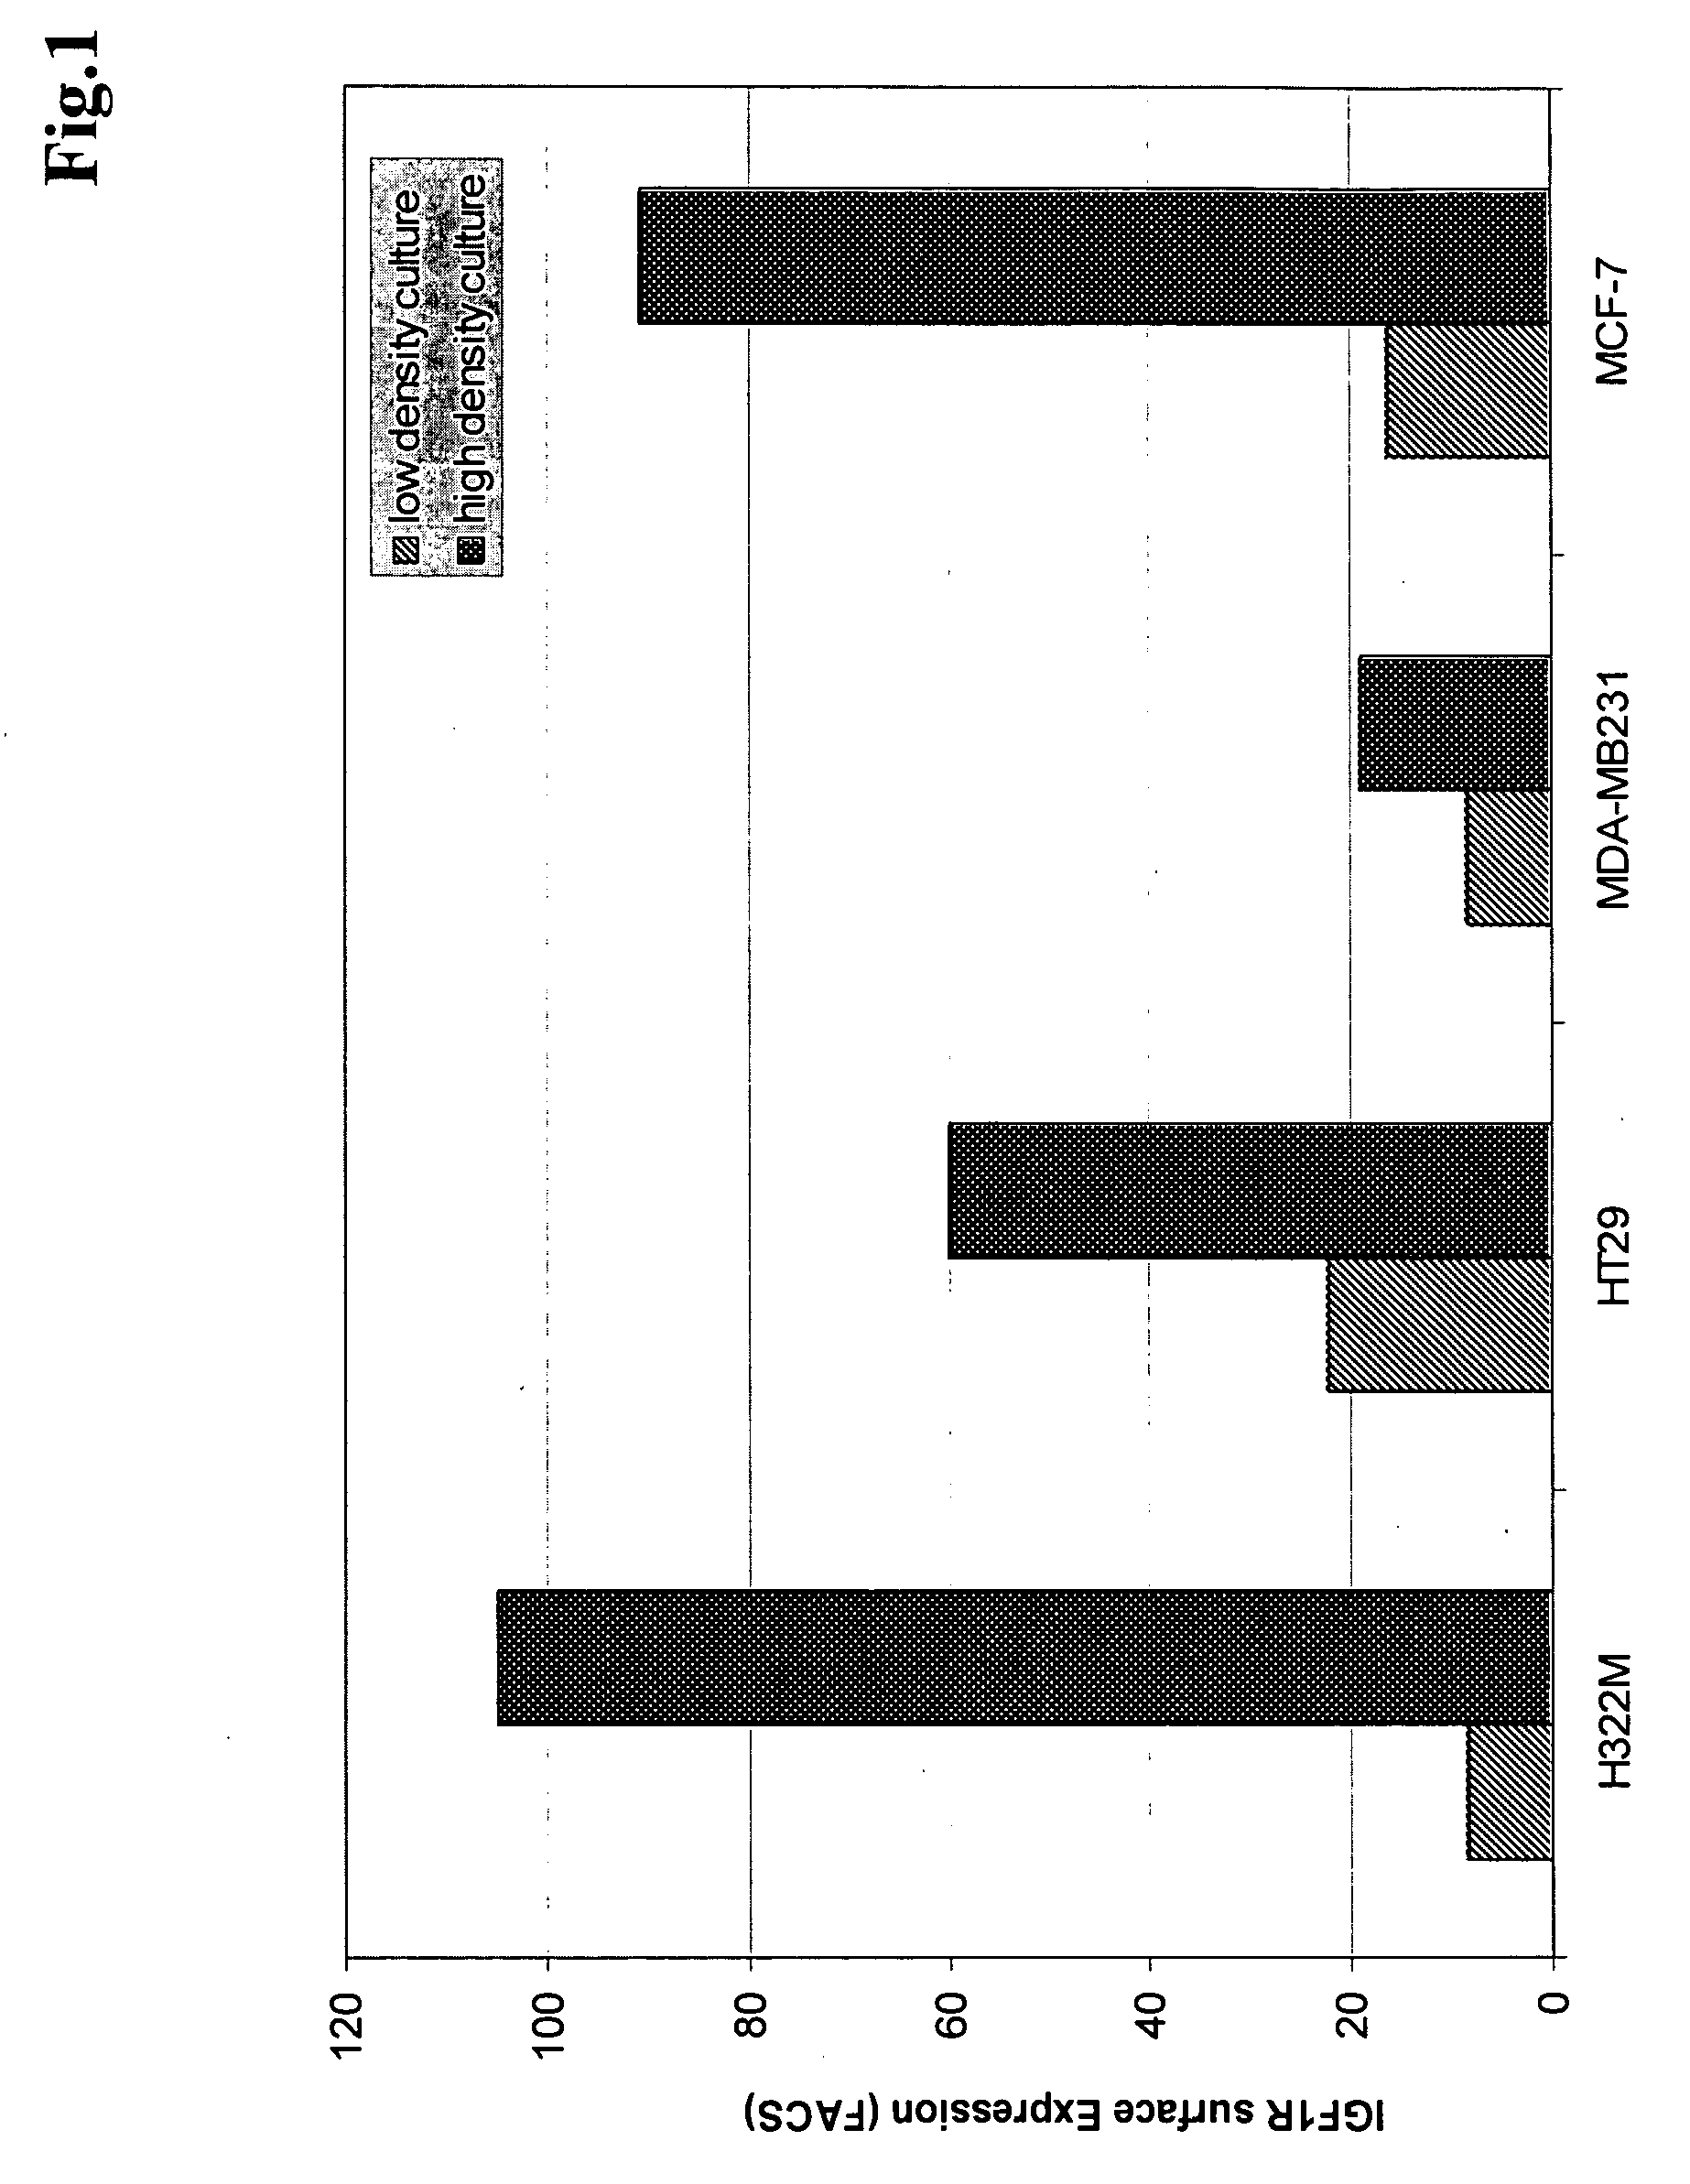 Antibodies against insulin-like growth factor 1 receptor and uses thereof